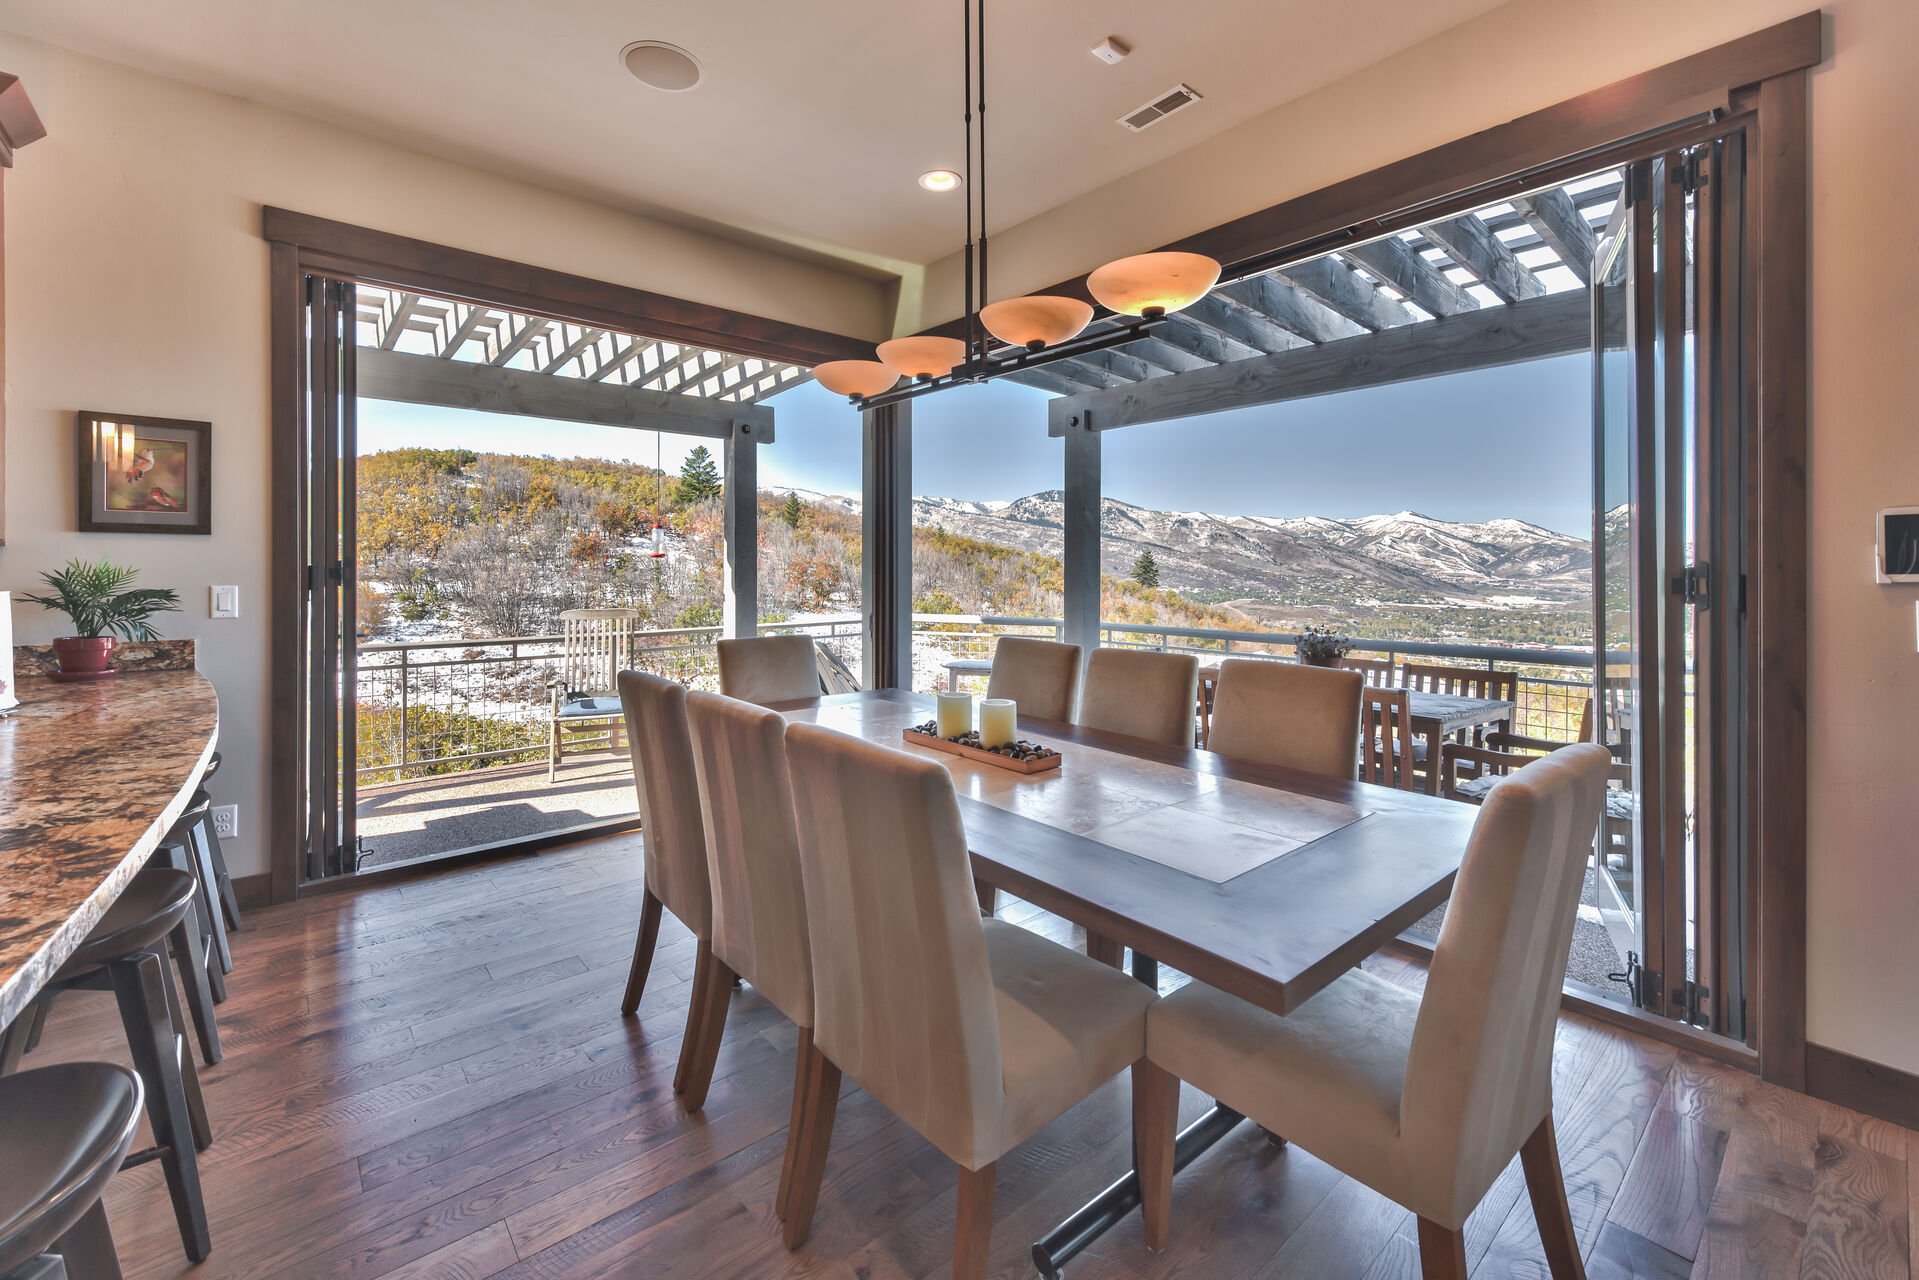 Dining Area with Slider Doors that Open Completely to the Private Deck with Patio Dining Table, a Gas BBQ Grill and Amazing Views!